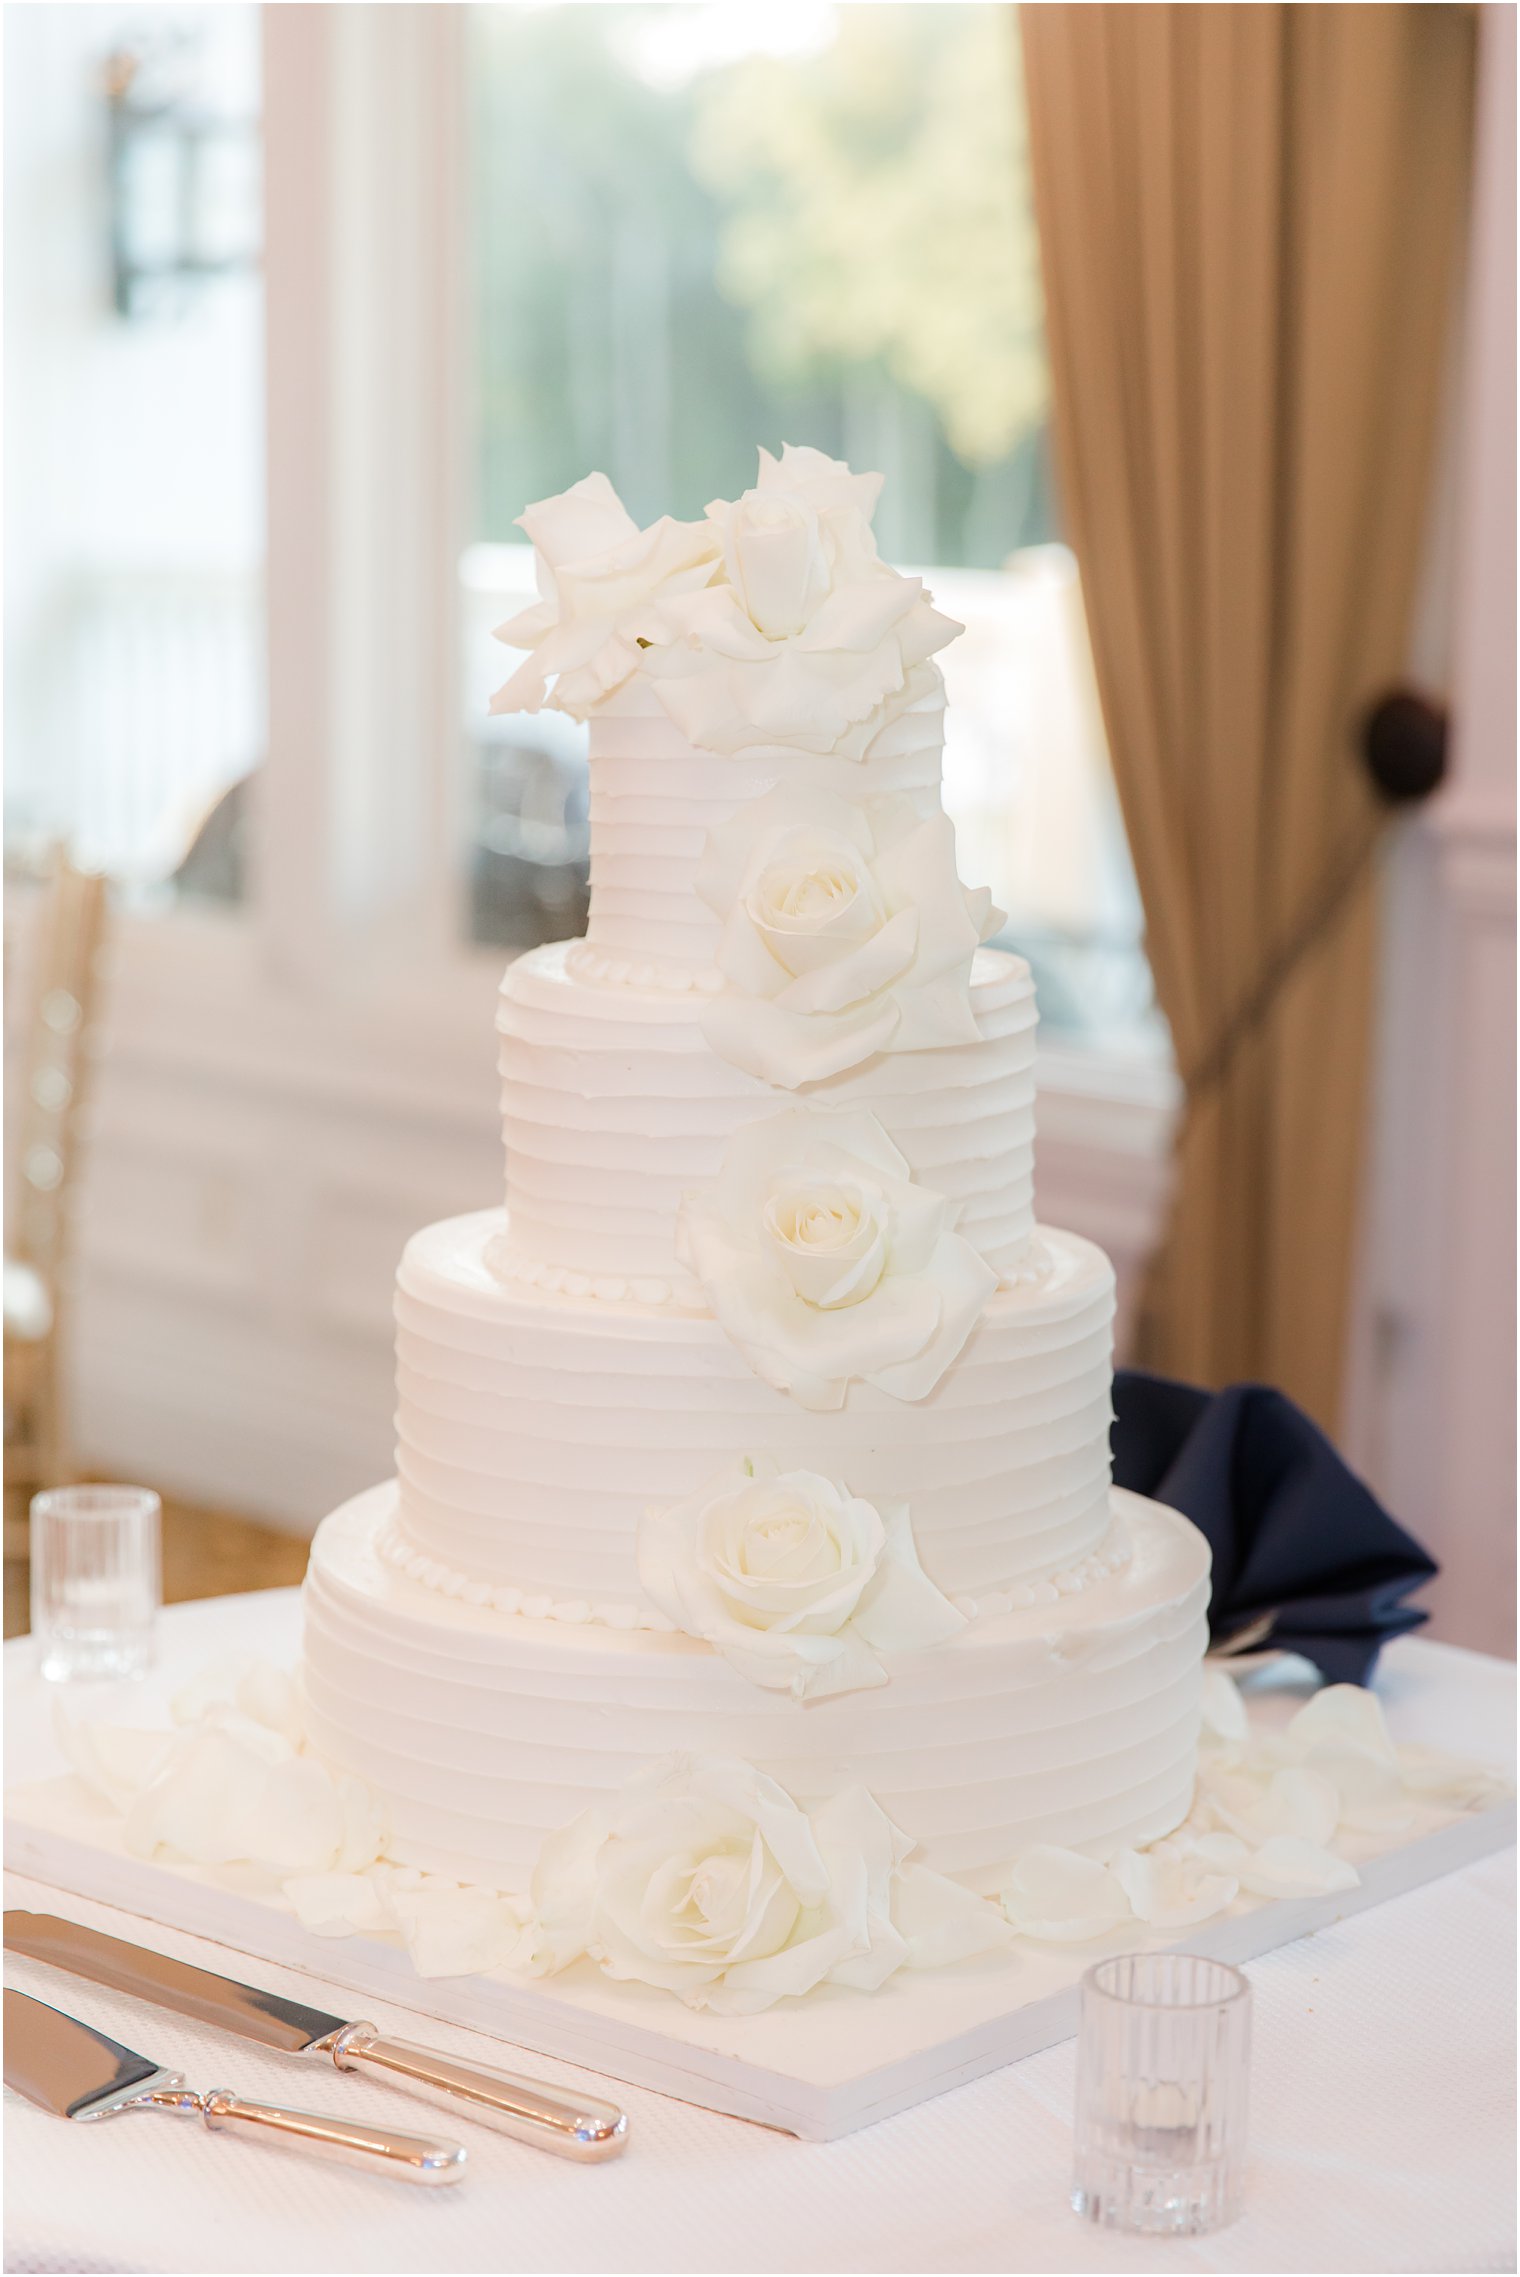 all-white tiered wedding cake with roses